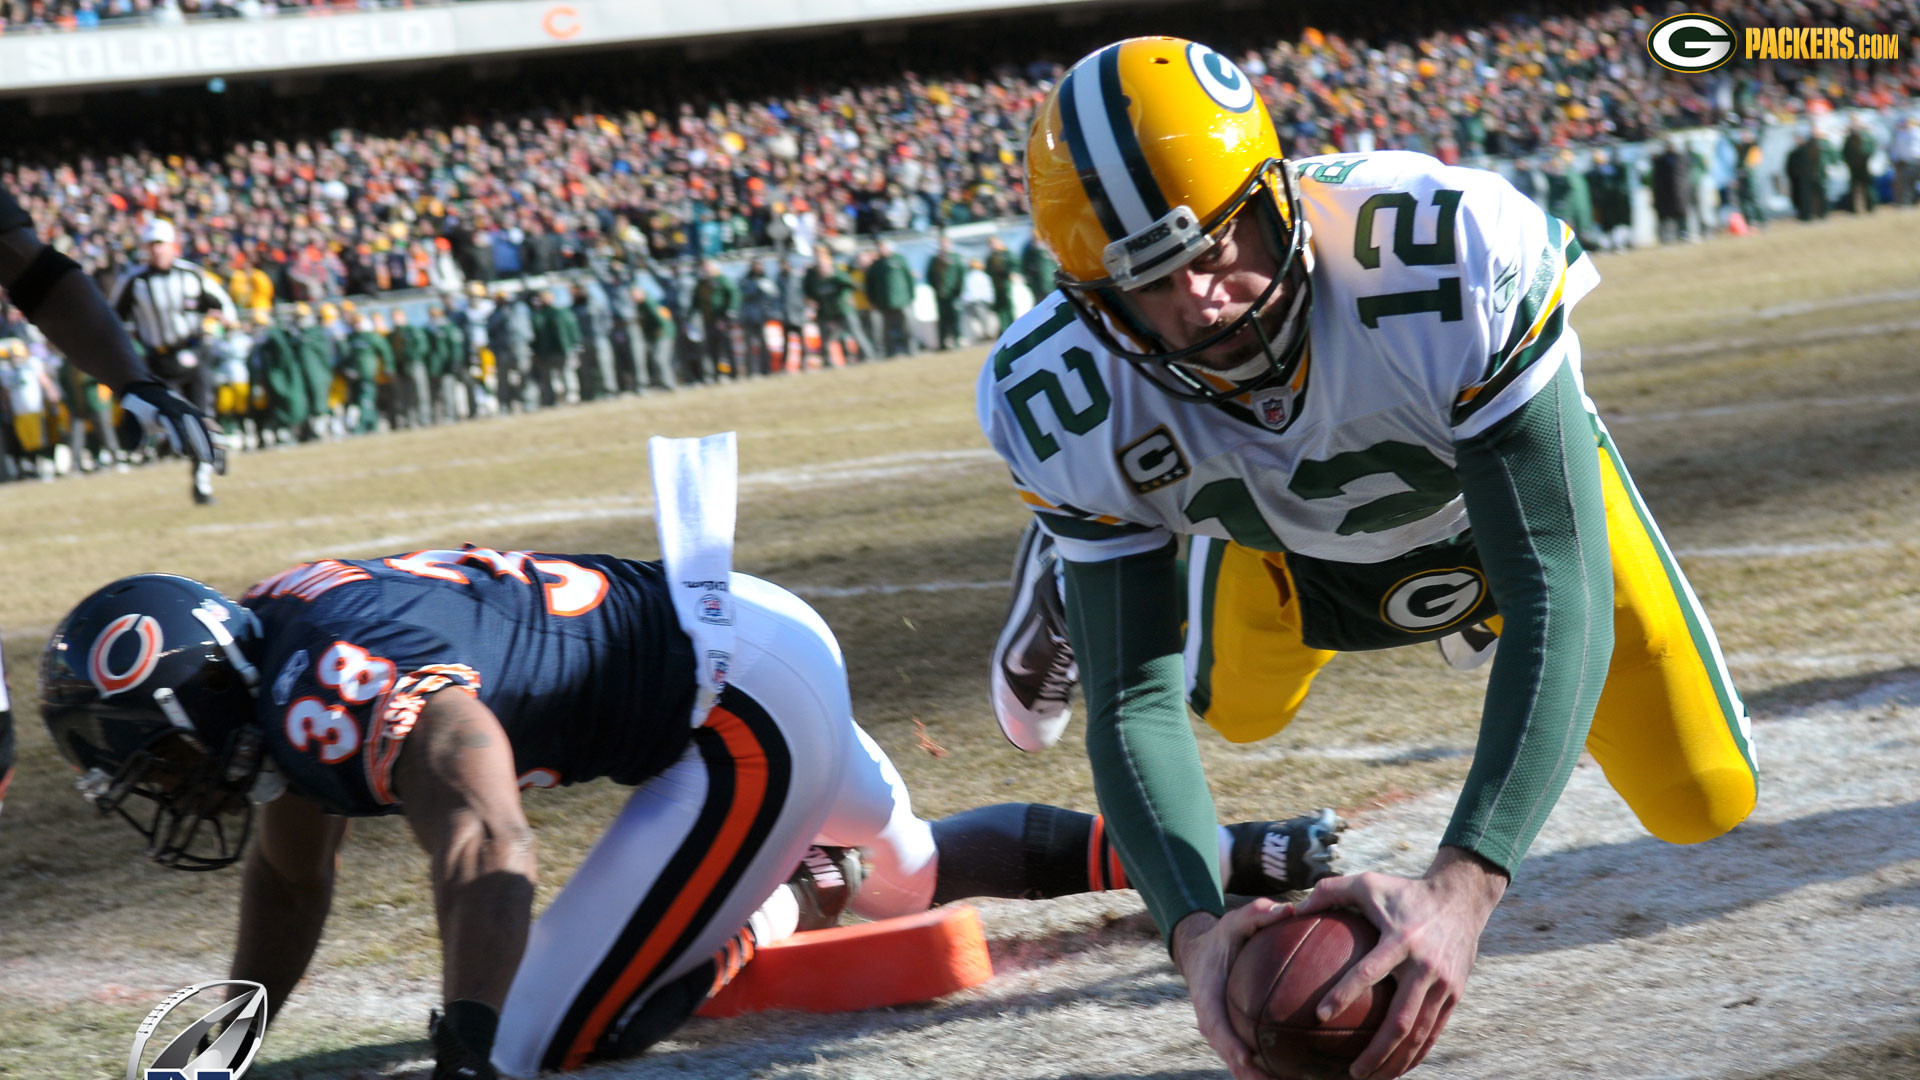 1920x1080 nfl green bay packers qb aaron rodgers touchdown